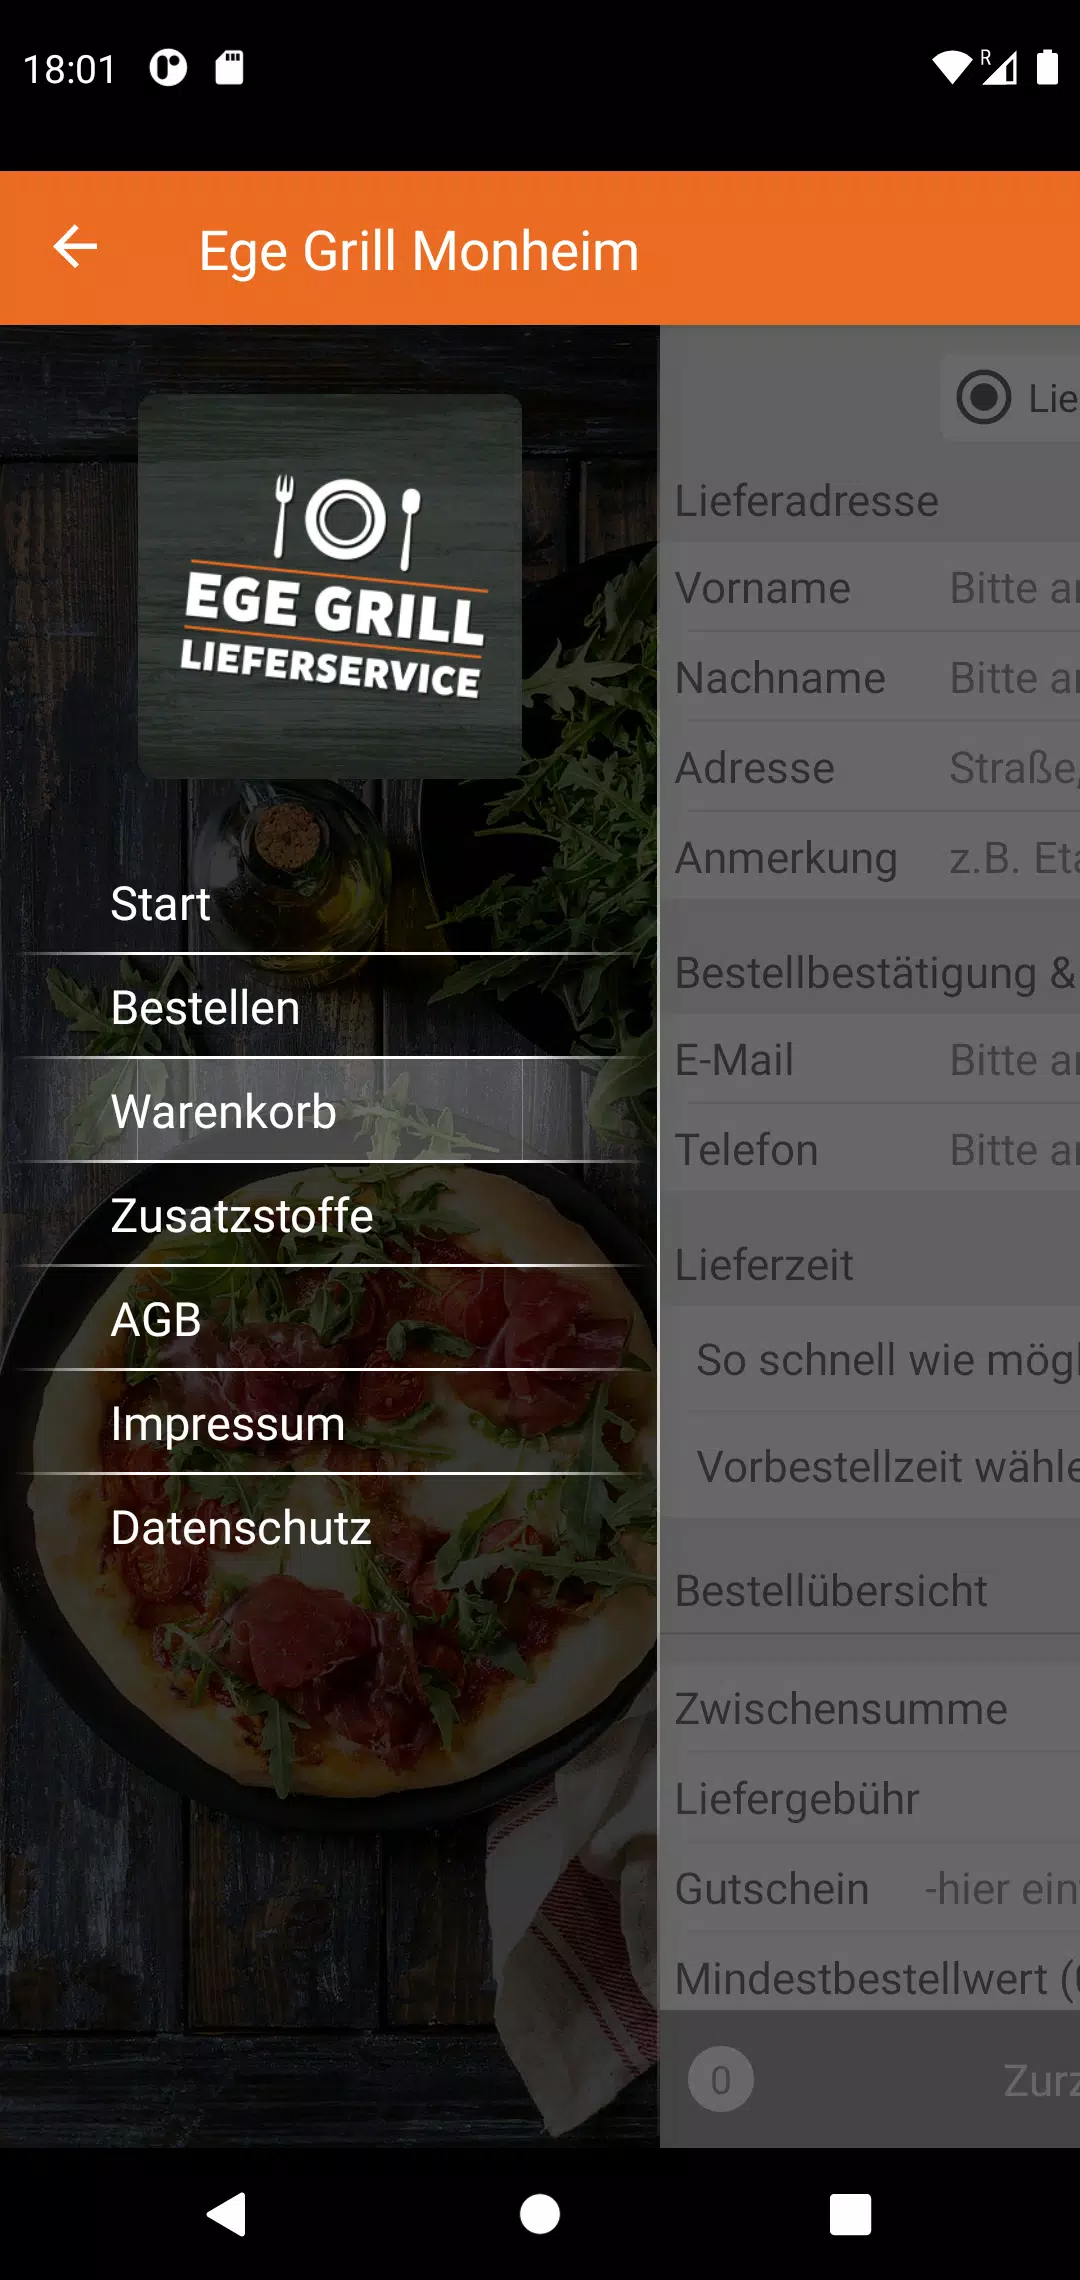 Ege Grill Monheim for Android - APK Download